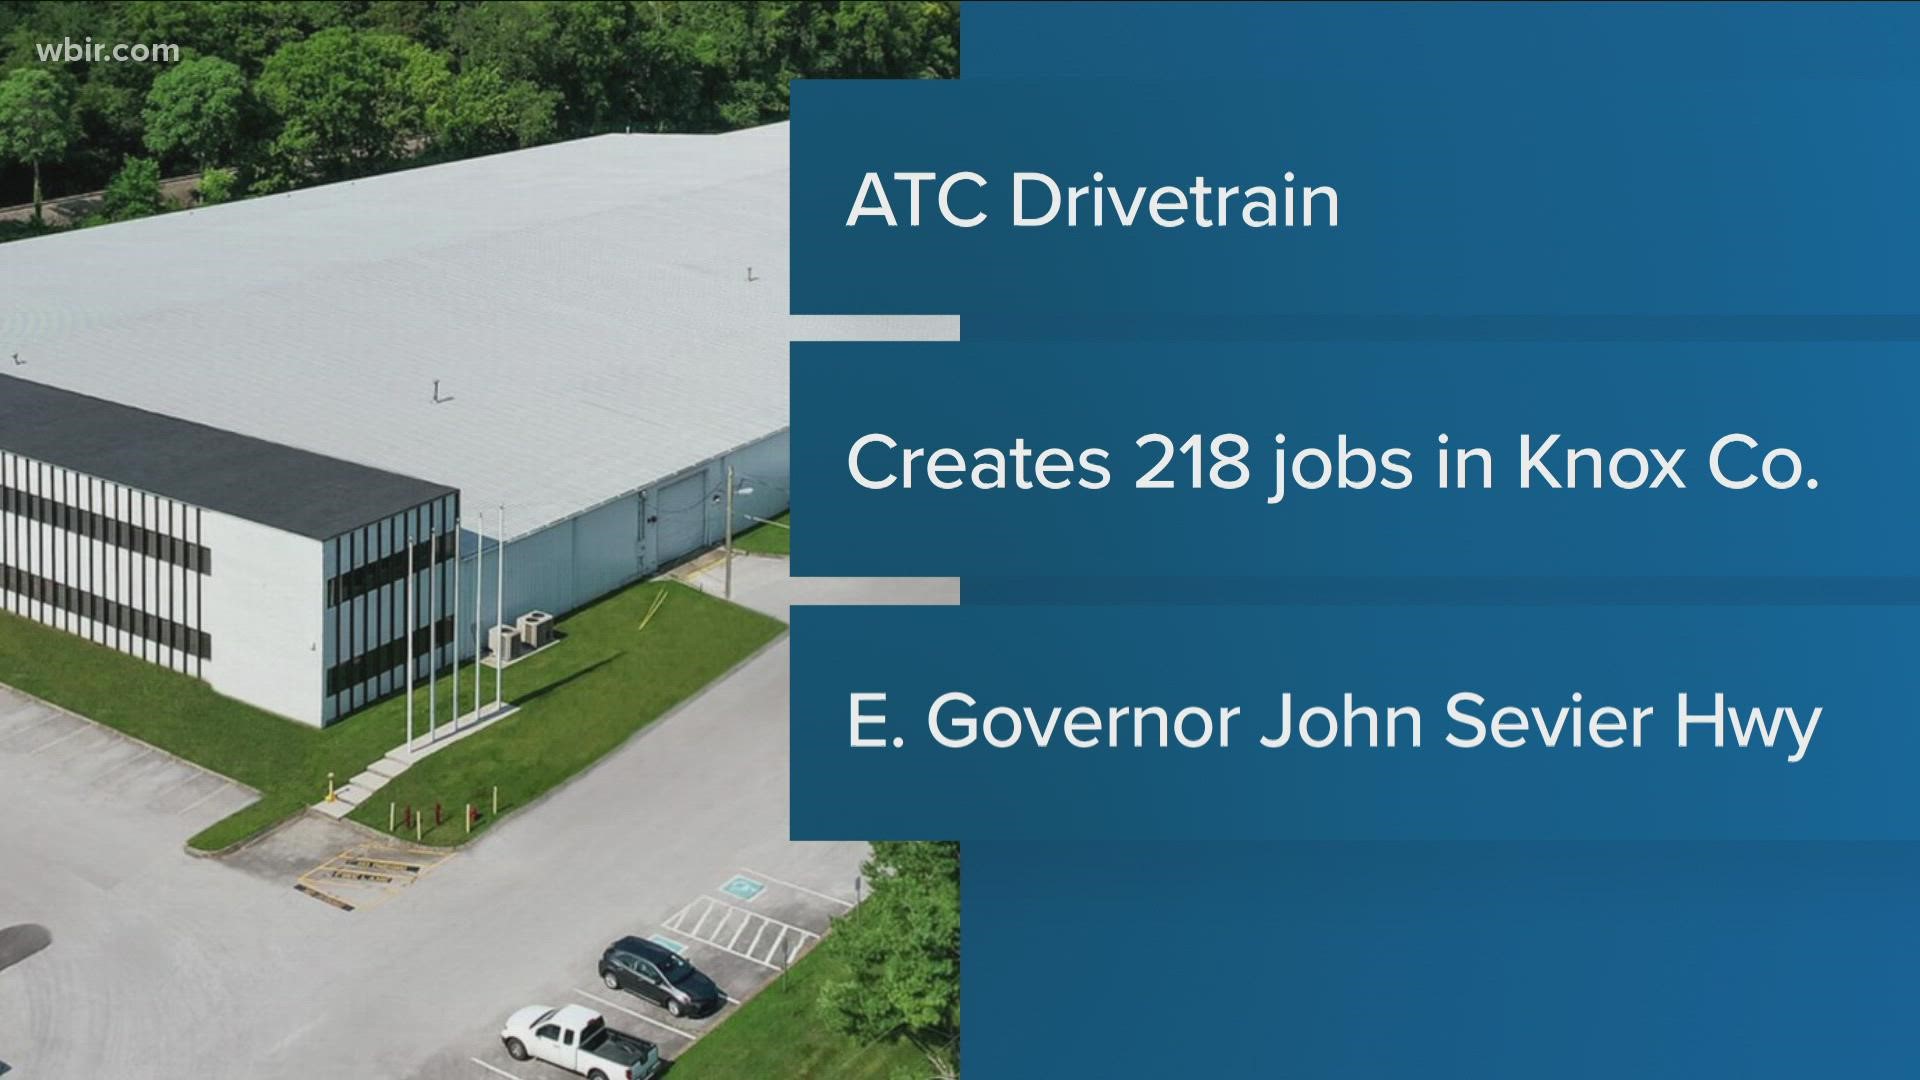 ATC Drivetrain is the leading independent global remanufacturer of drivetrain and powertrain systems. The new facility will bring 218 manufacturing jobs.